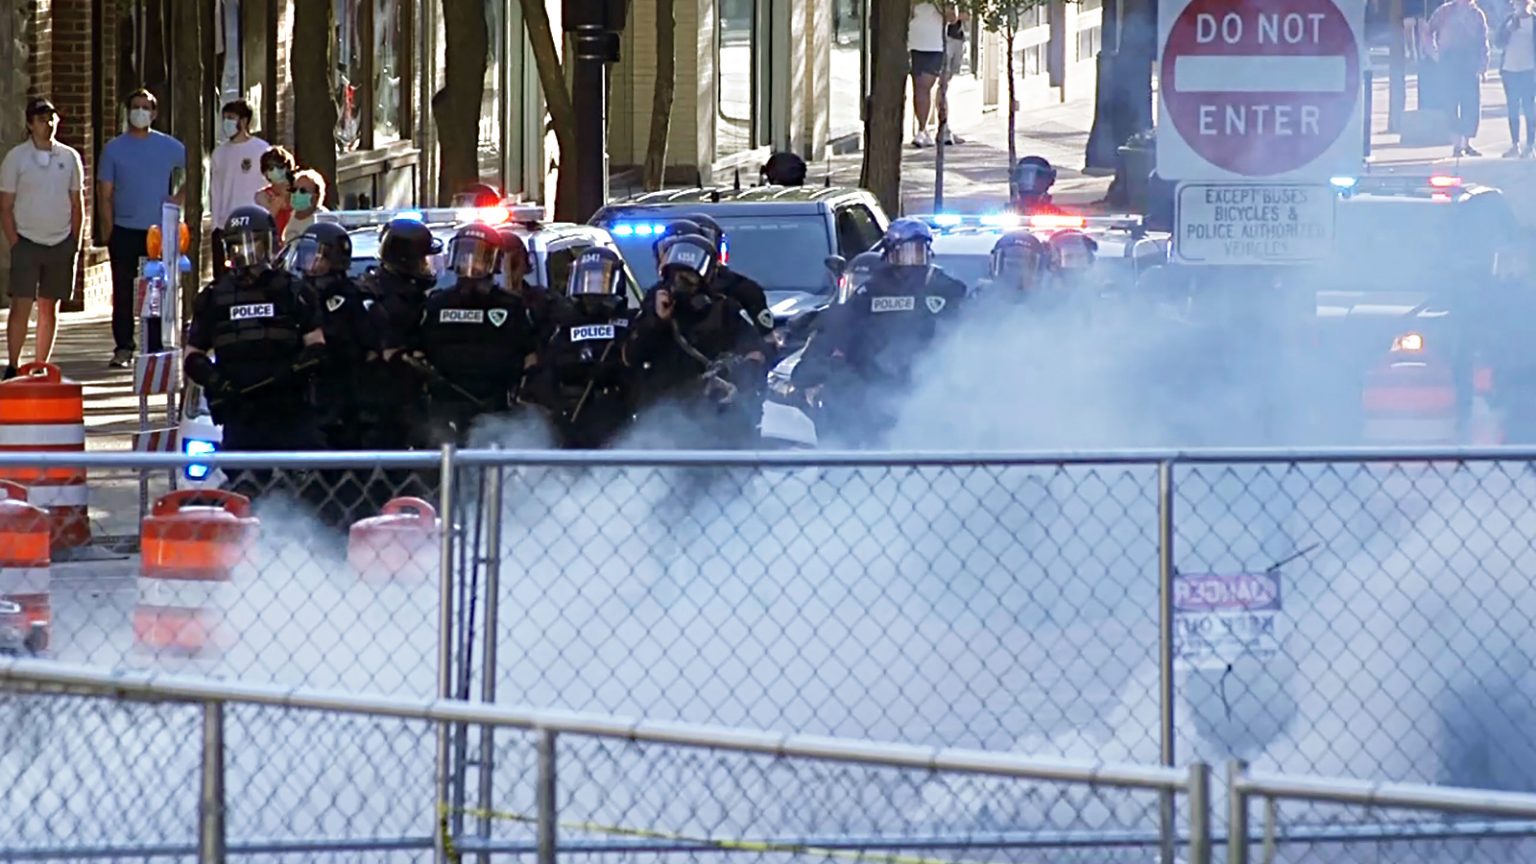 Temporary fencing and tear gas in front of a line of police officers